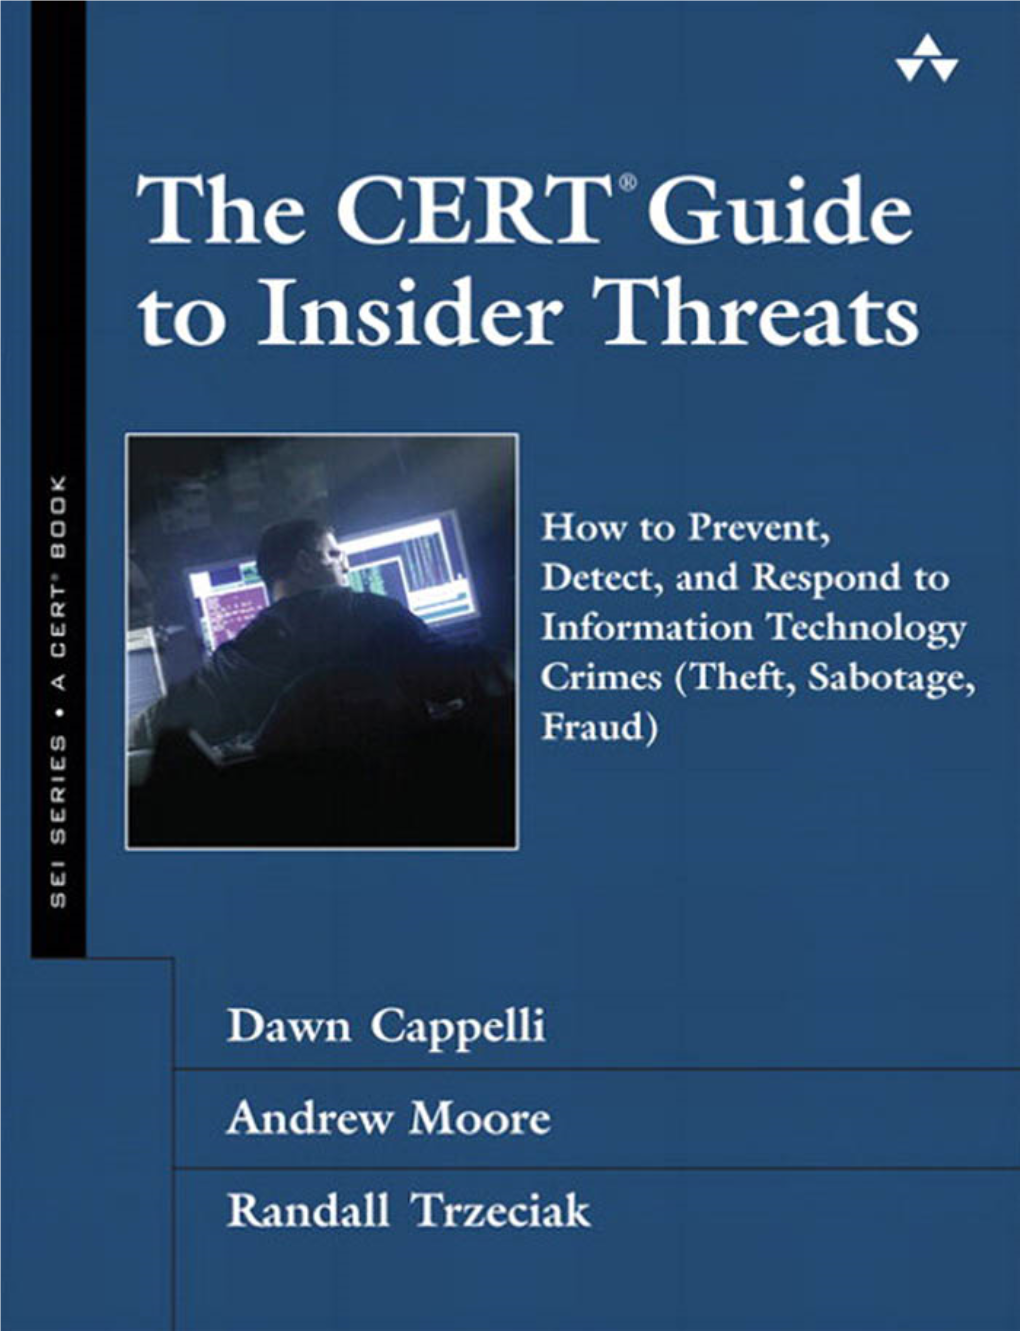 The CERT® Guide to Insider Threats How to Prevent, Detect, and Respond to Information Technology Crimes